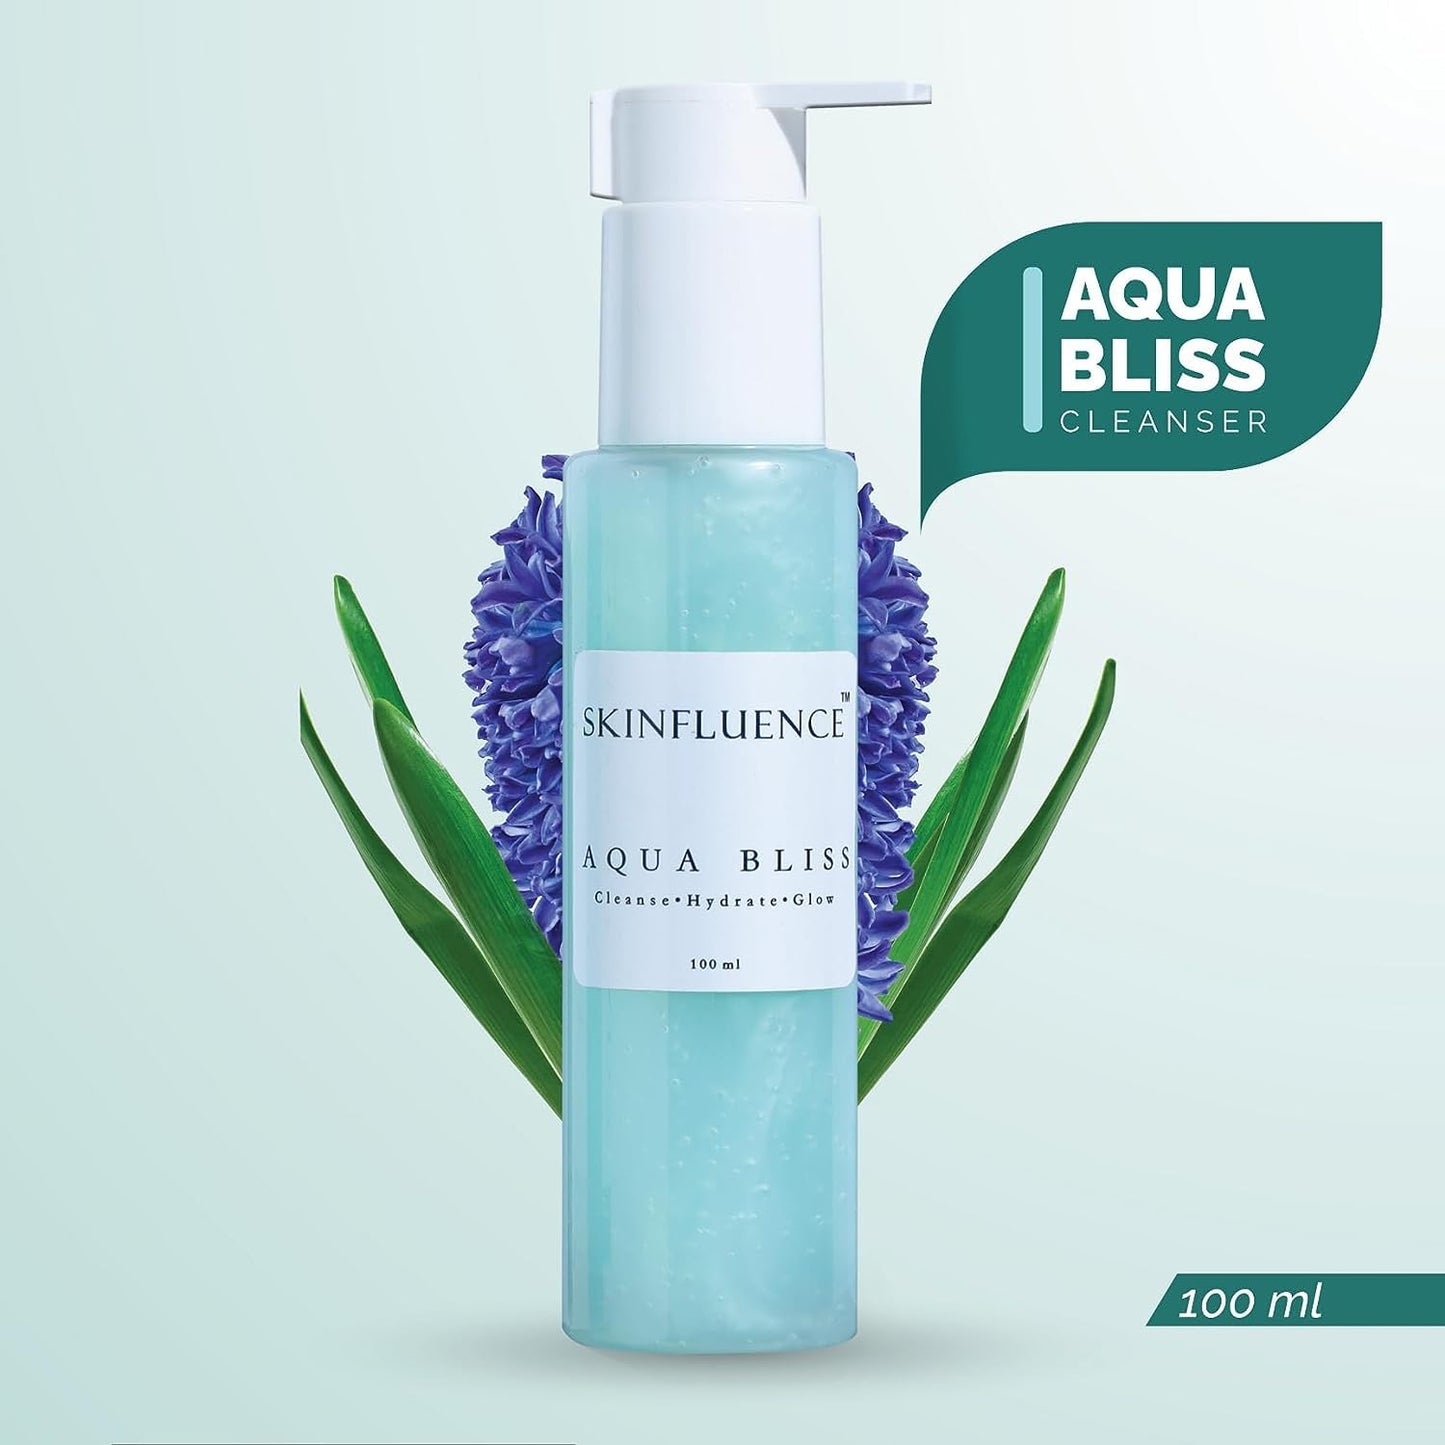 SKINFLUENCE Aqua Bliss Cleanser | 1% Salicylic Acid Hydrating & Mild Exfoliating Face Wash for Oily, Dry, Acne Prone & Combination Skin | Men & Women - 2×100ml (Pack of 2)